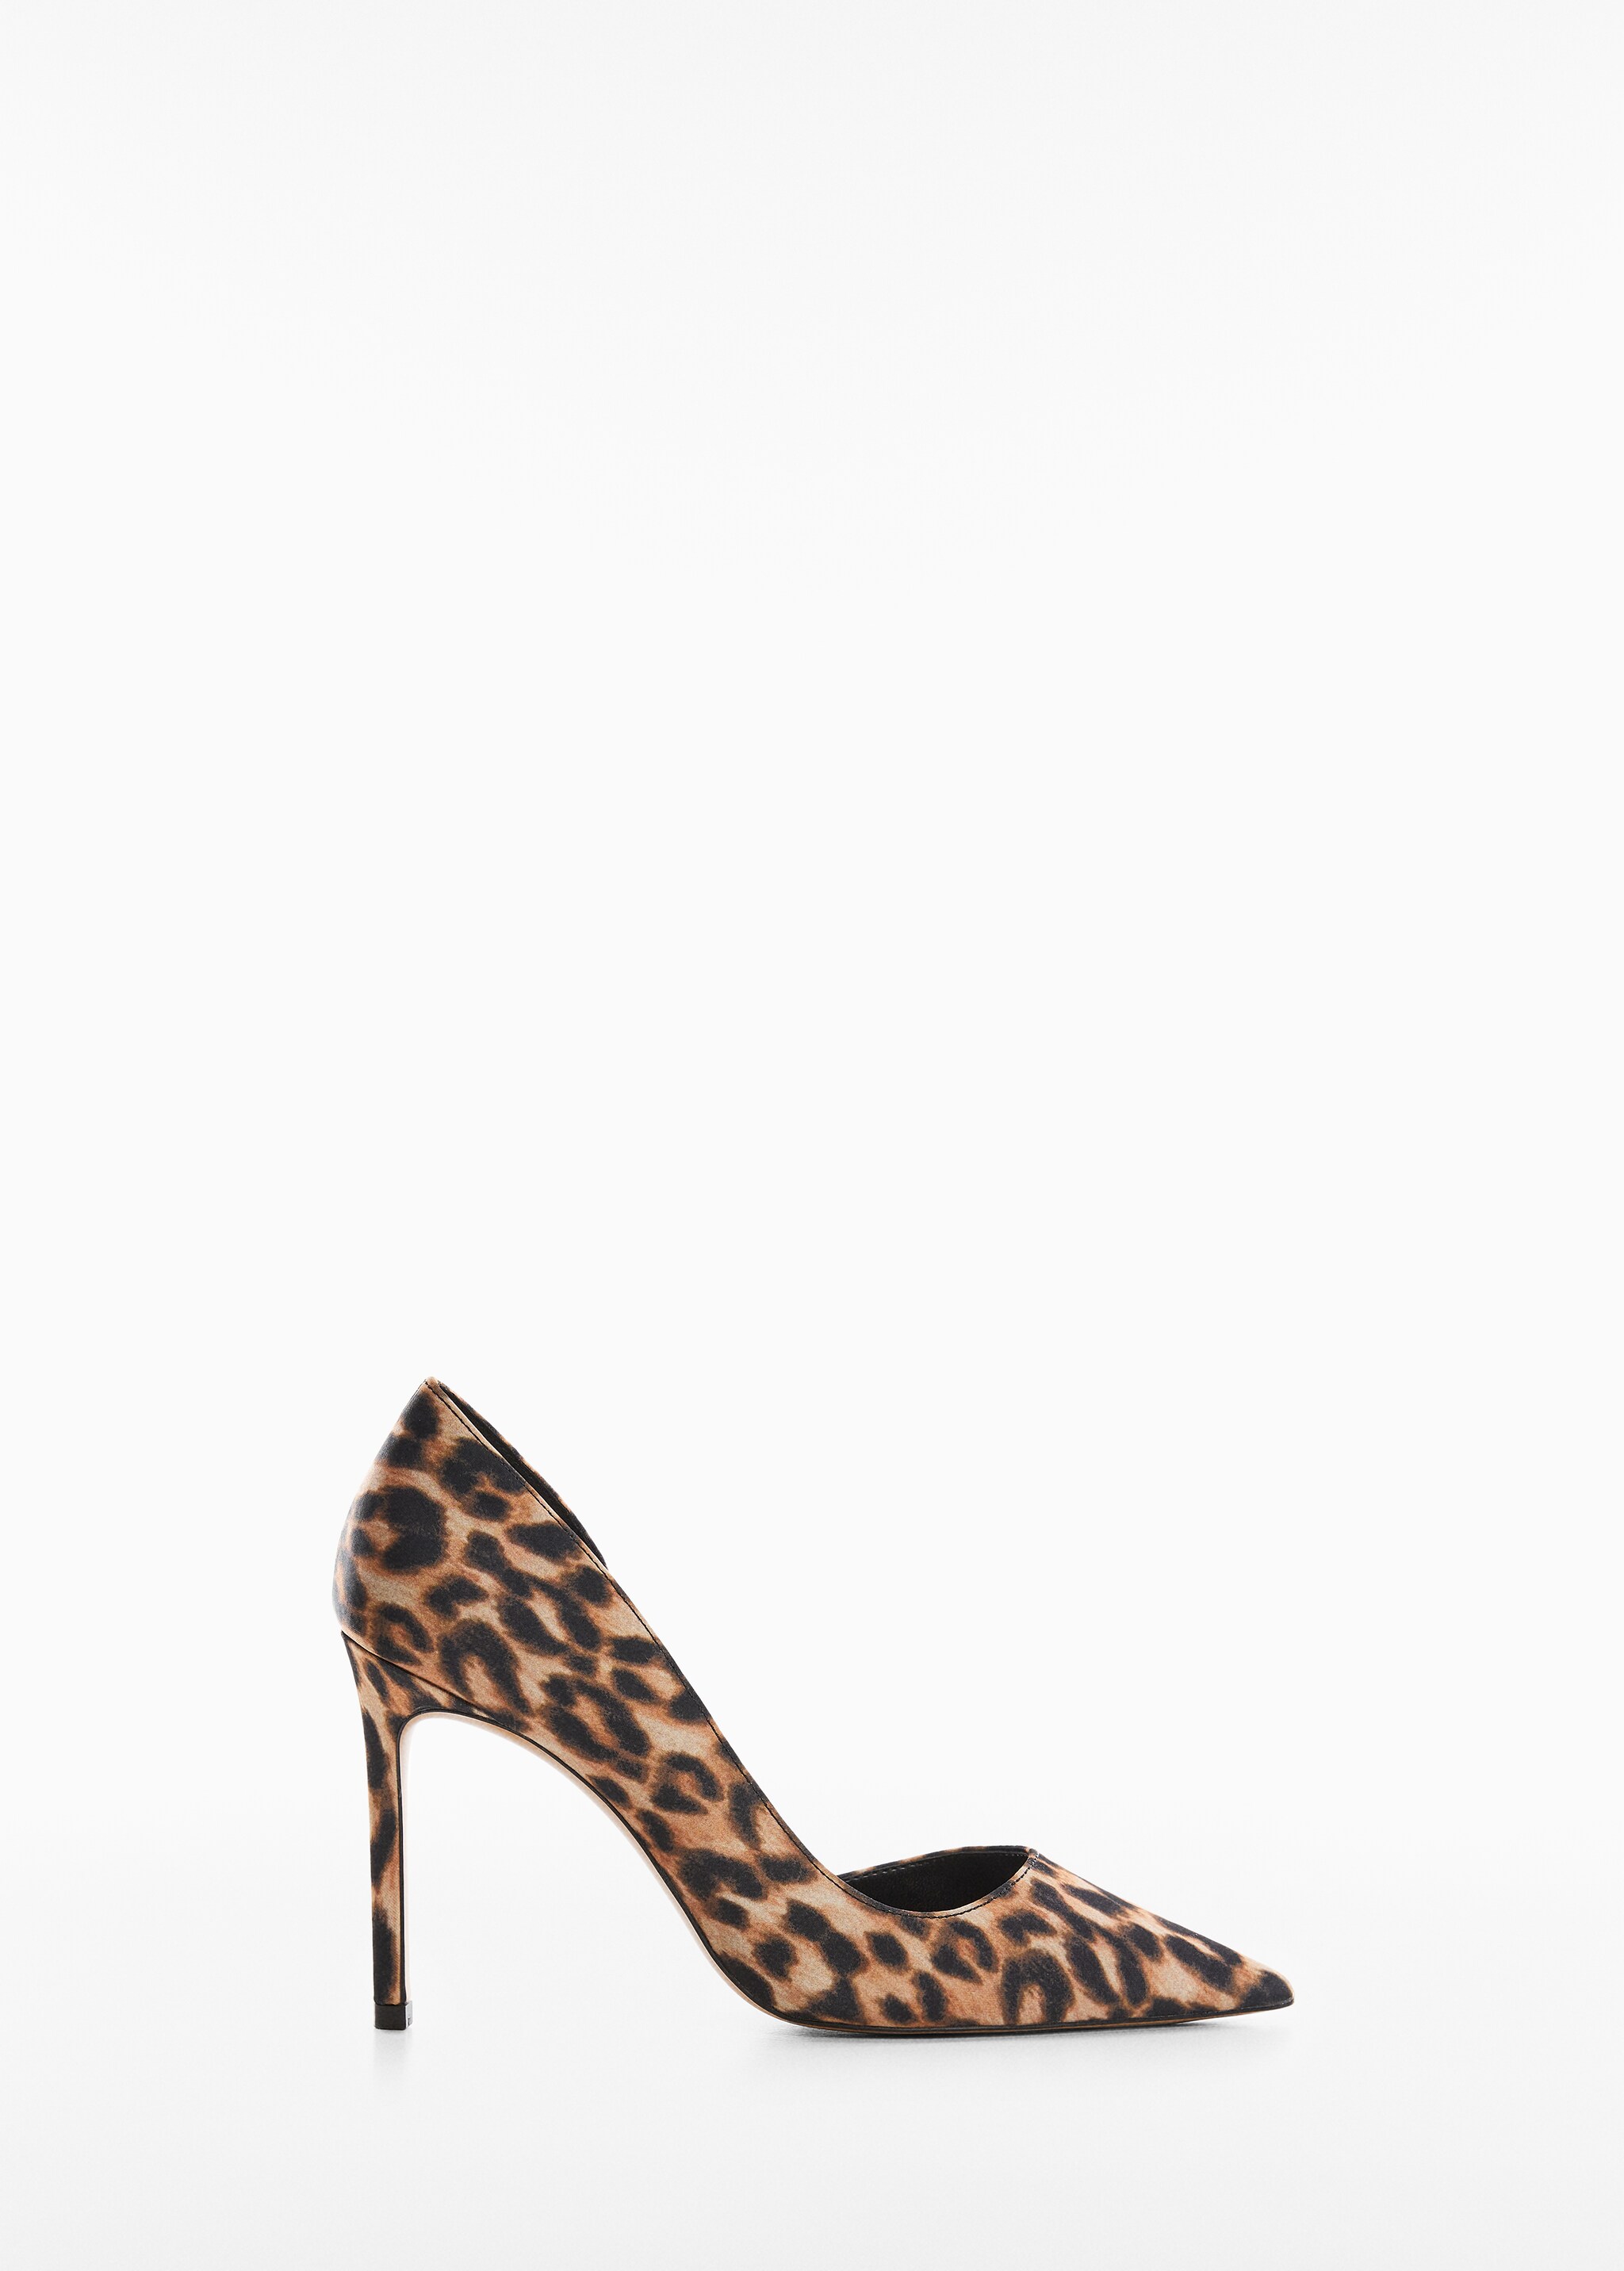 Animal-print high heeled shoes - Article without model